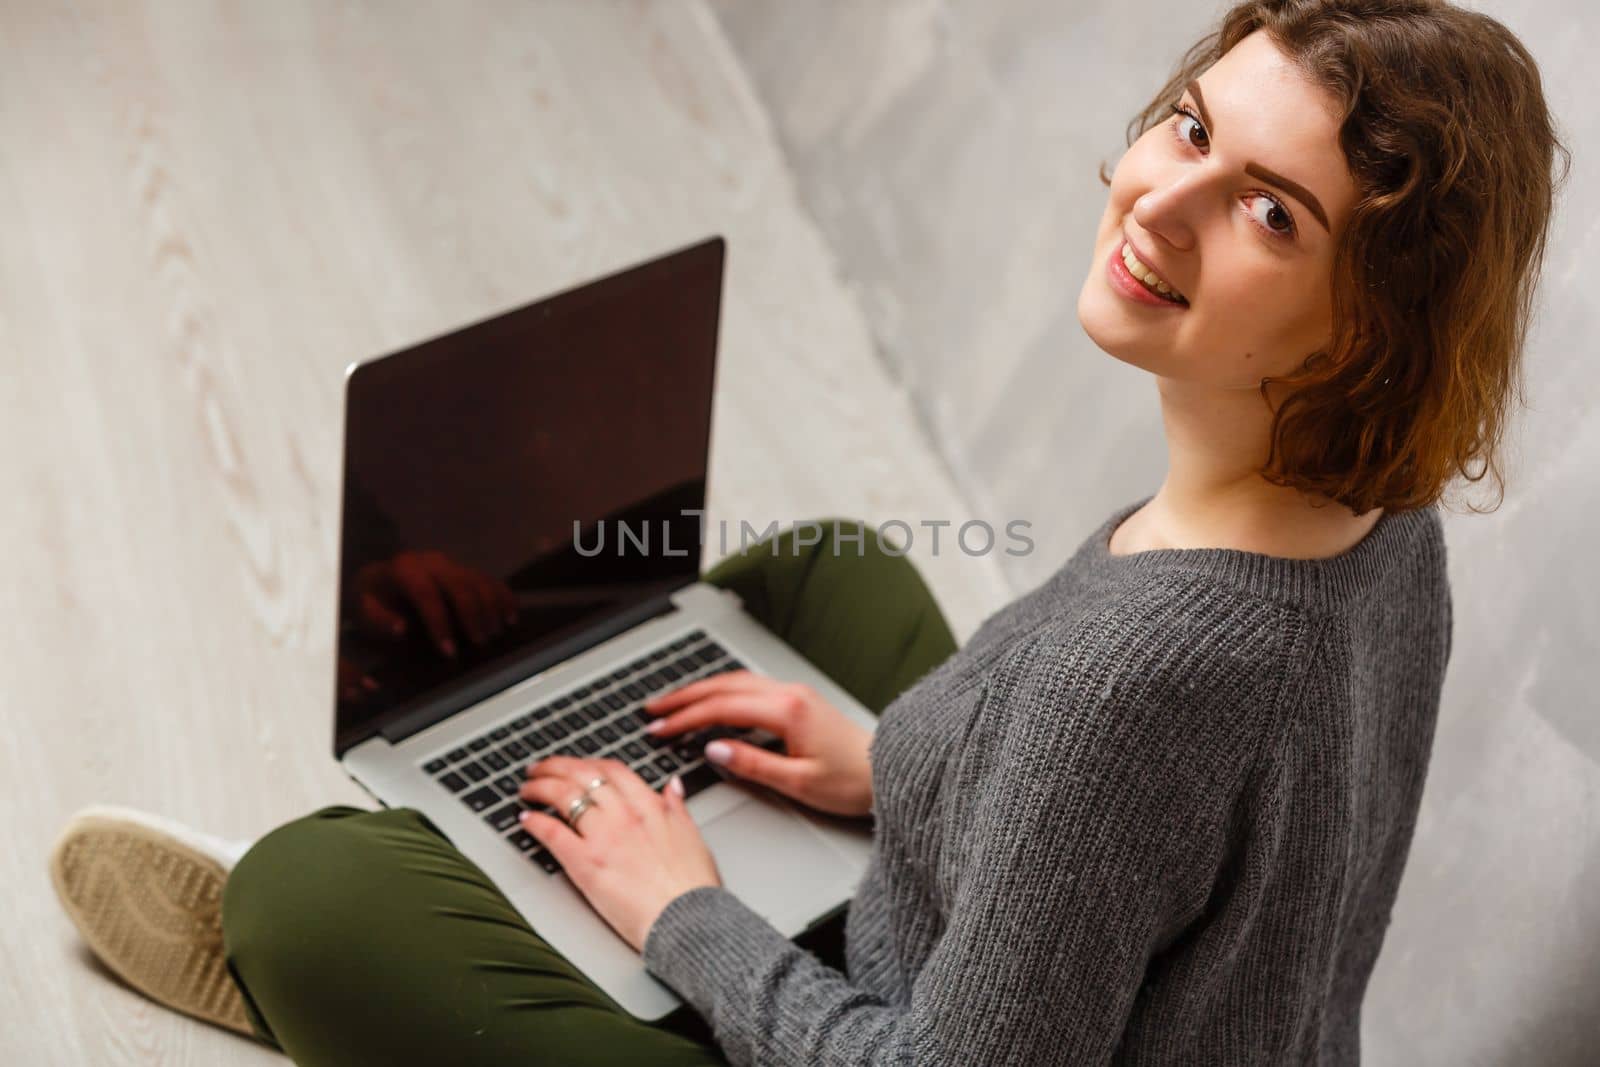 Portrait of satisfied female with beautiful smile enjoying watching movie in silver computer and sitting in lotus pose on the floor over grey wall